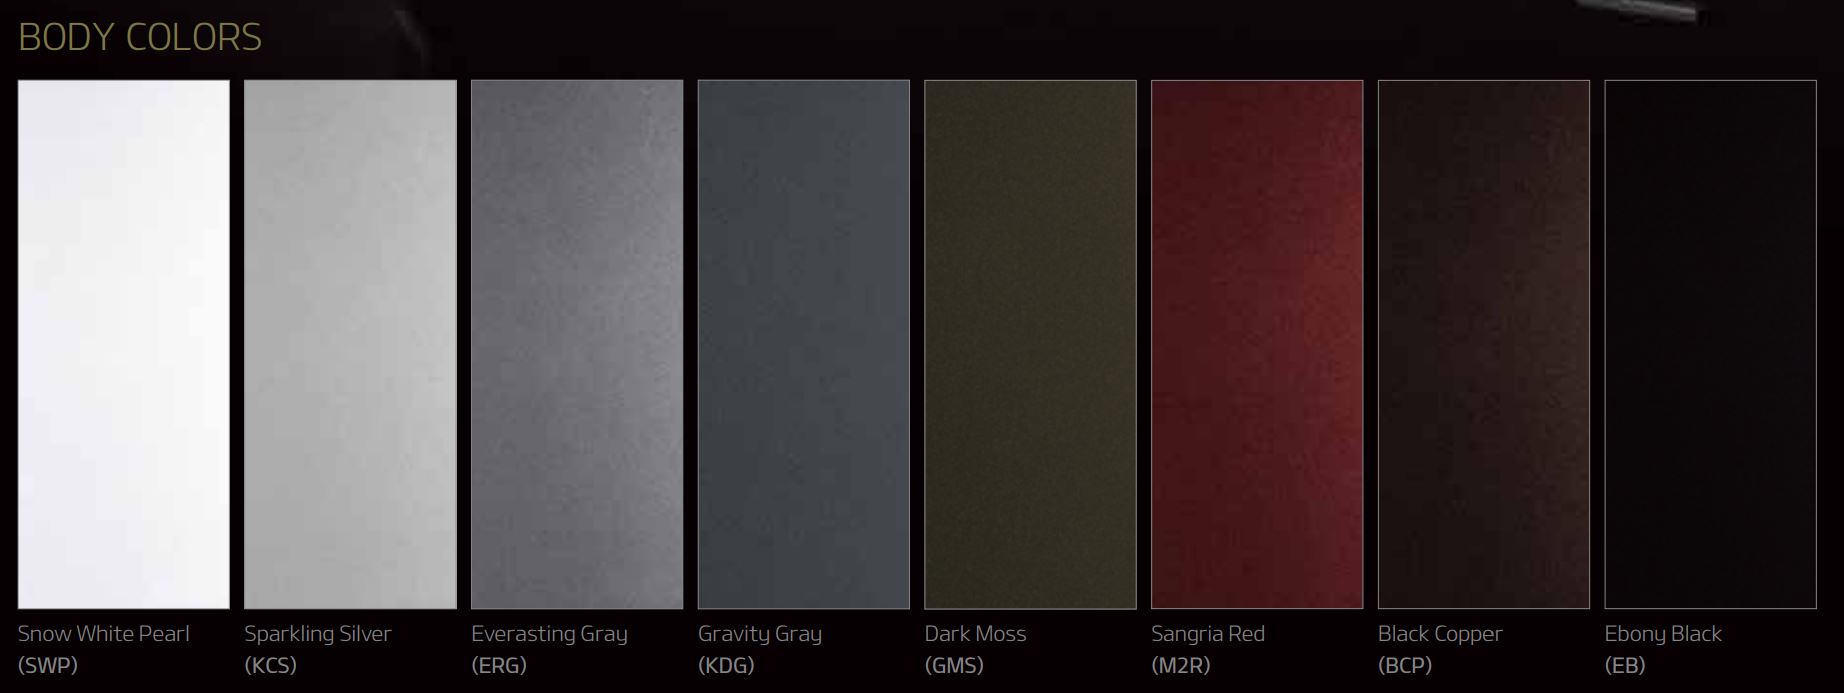 different color swatches for kia 